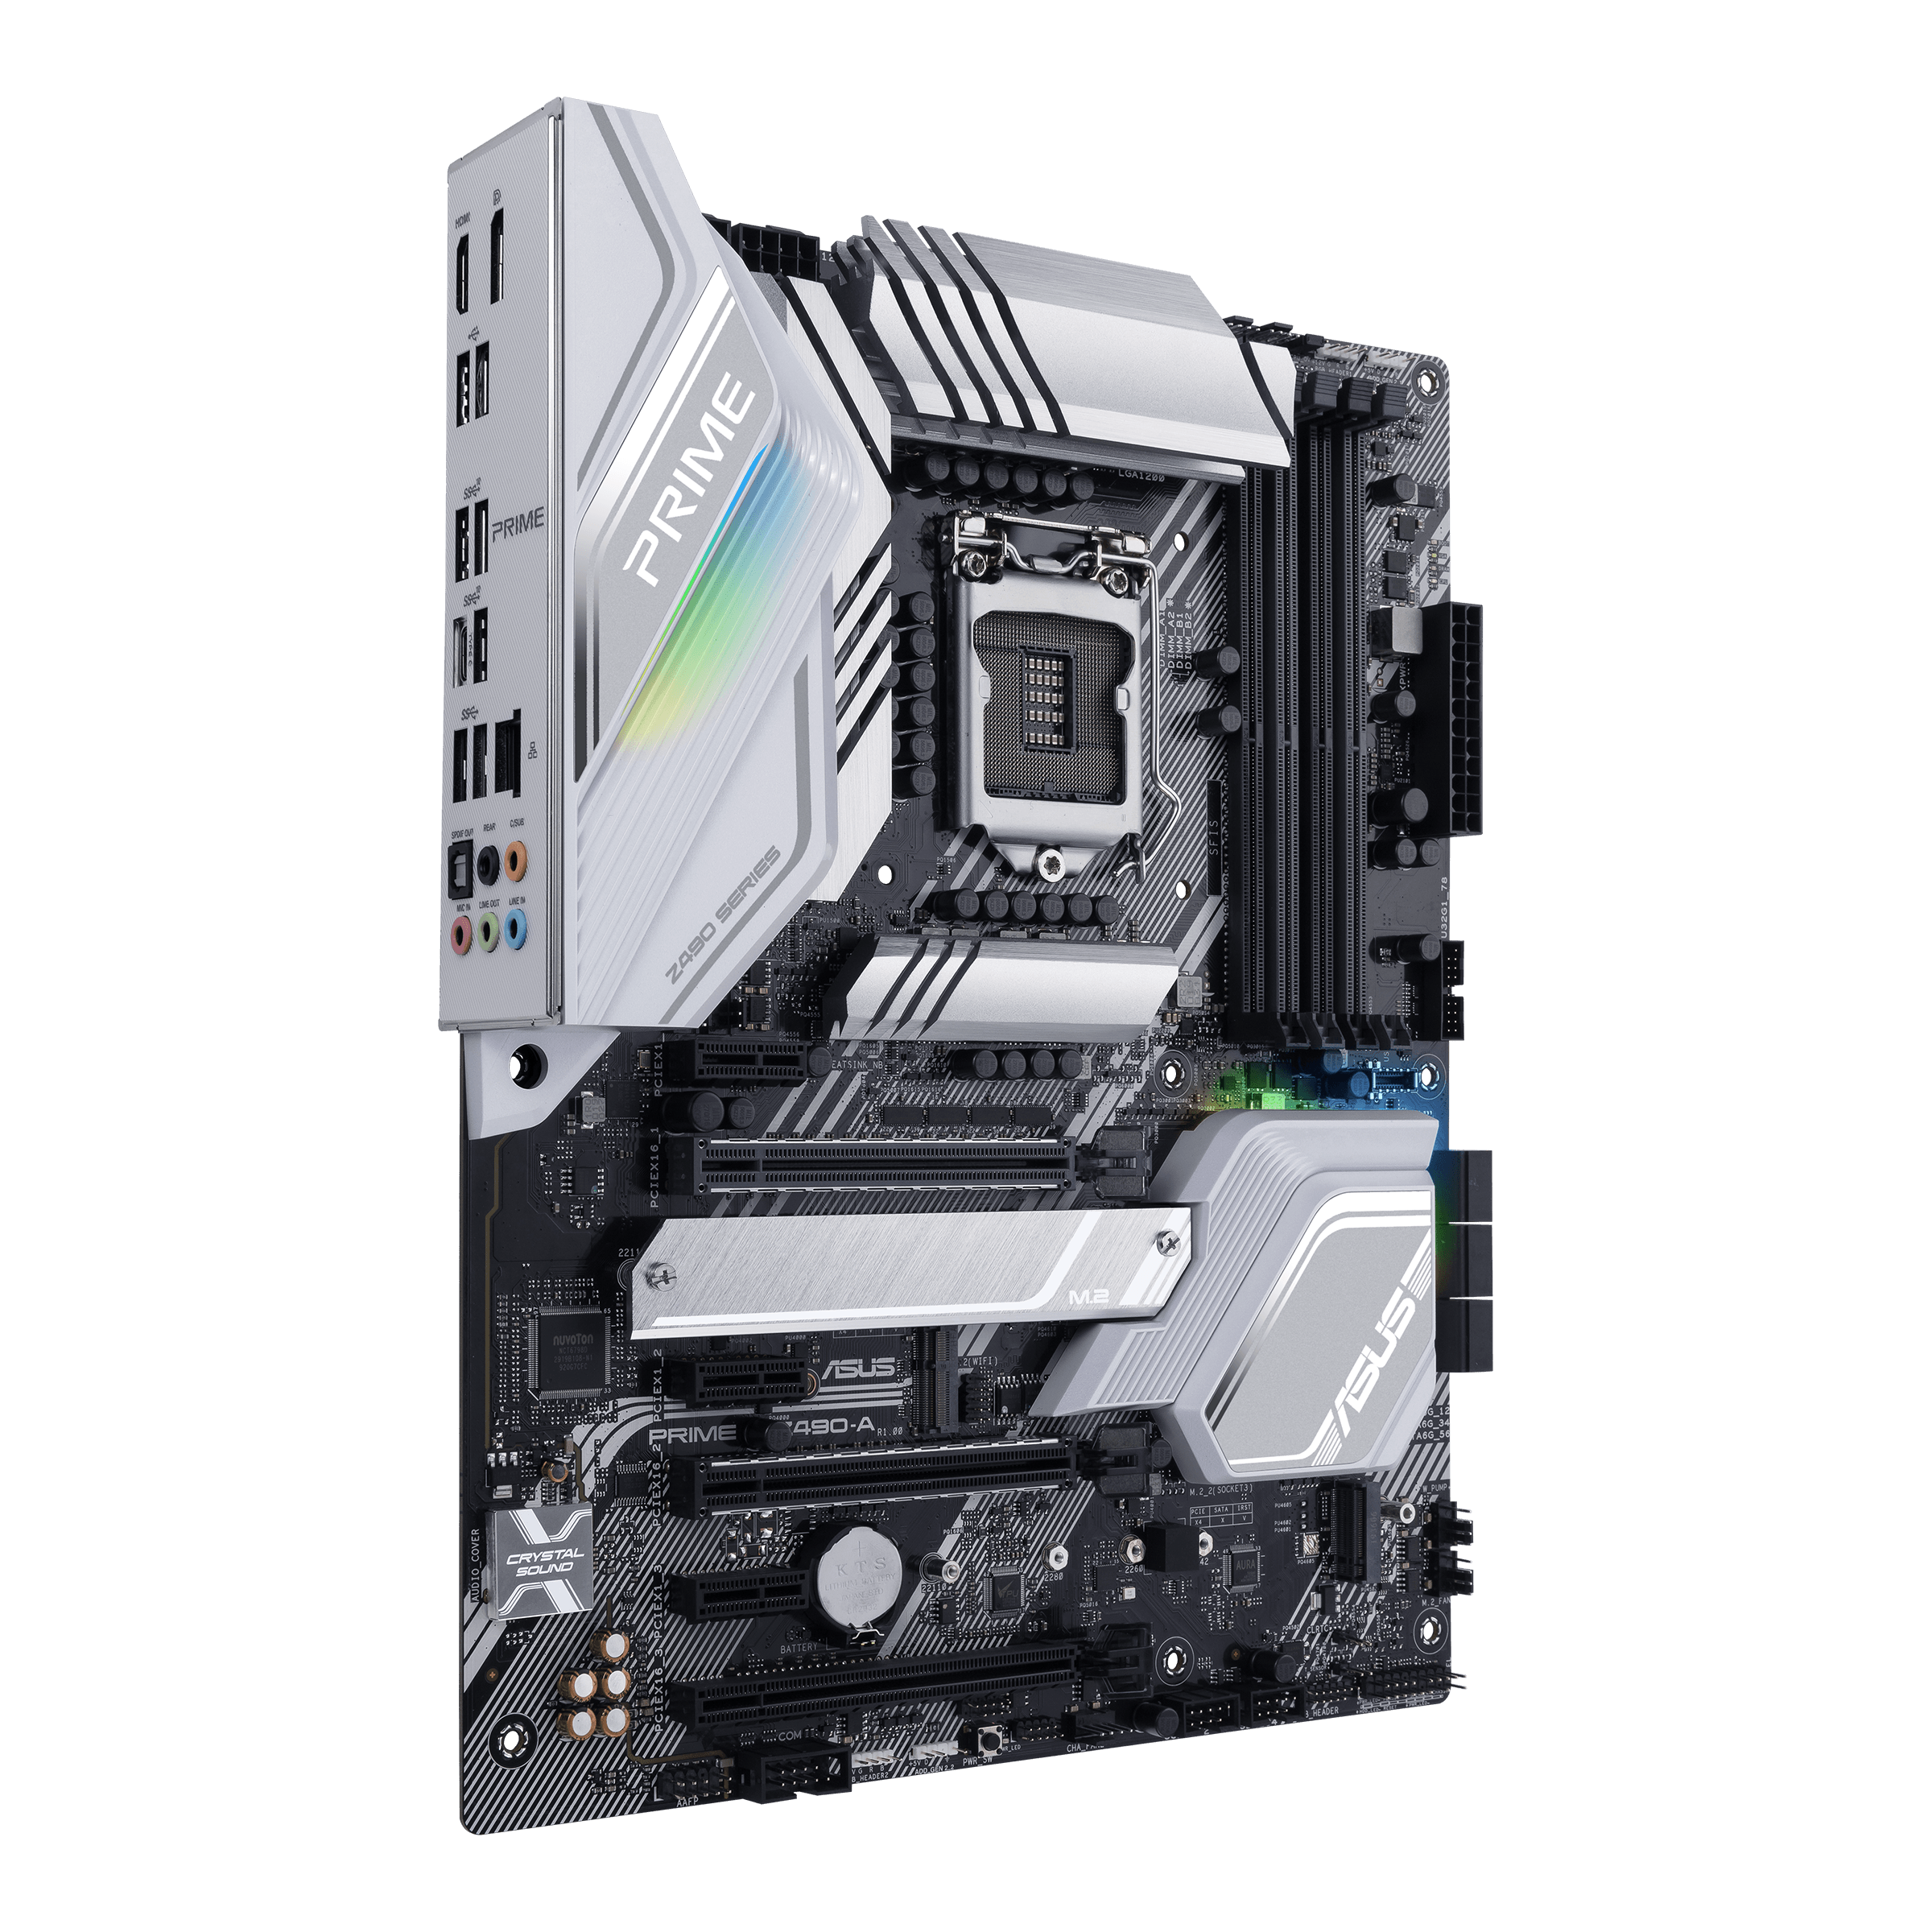 PRIME Z490-A｜Motherboards｜ASUS USA